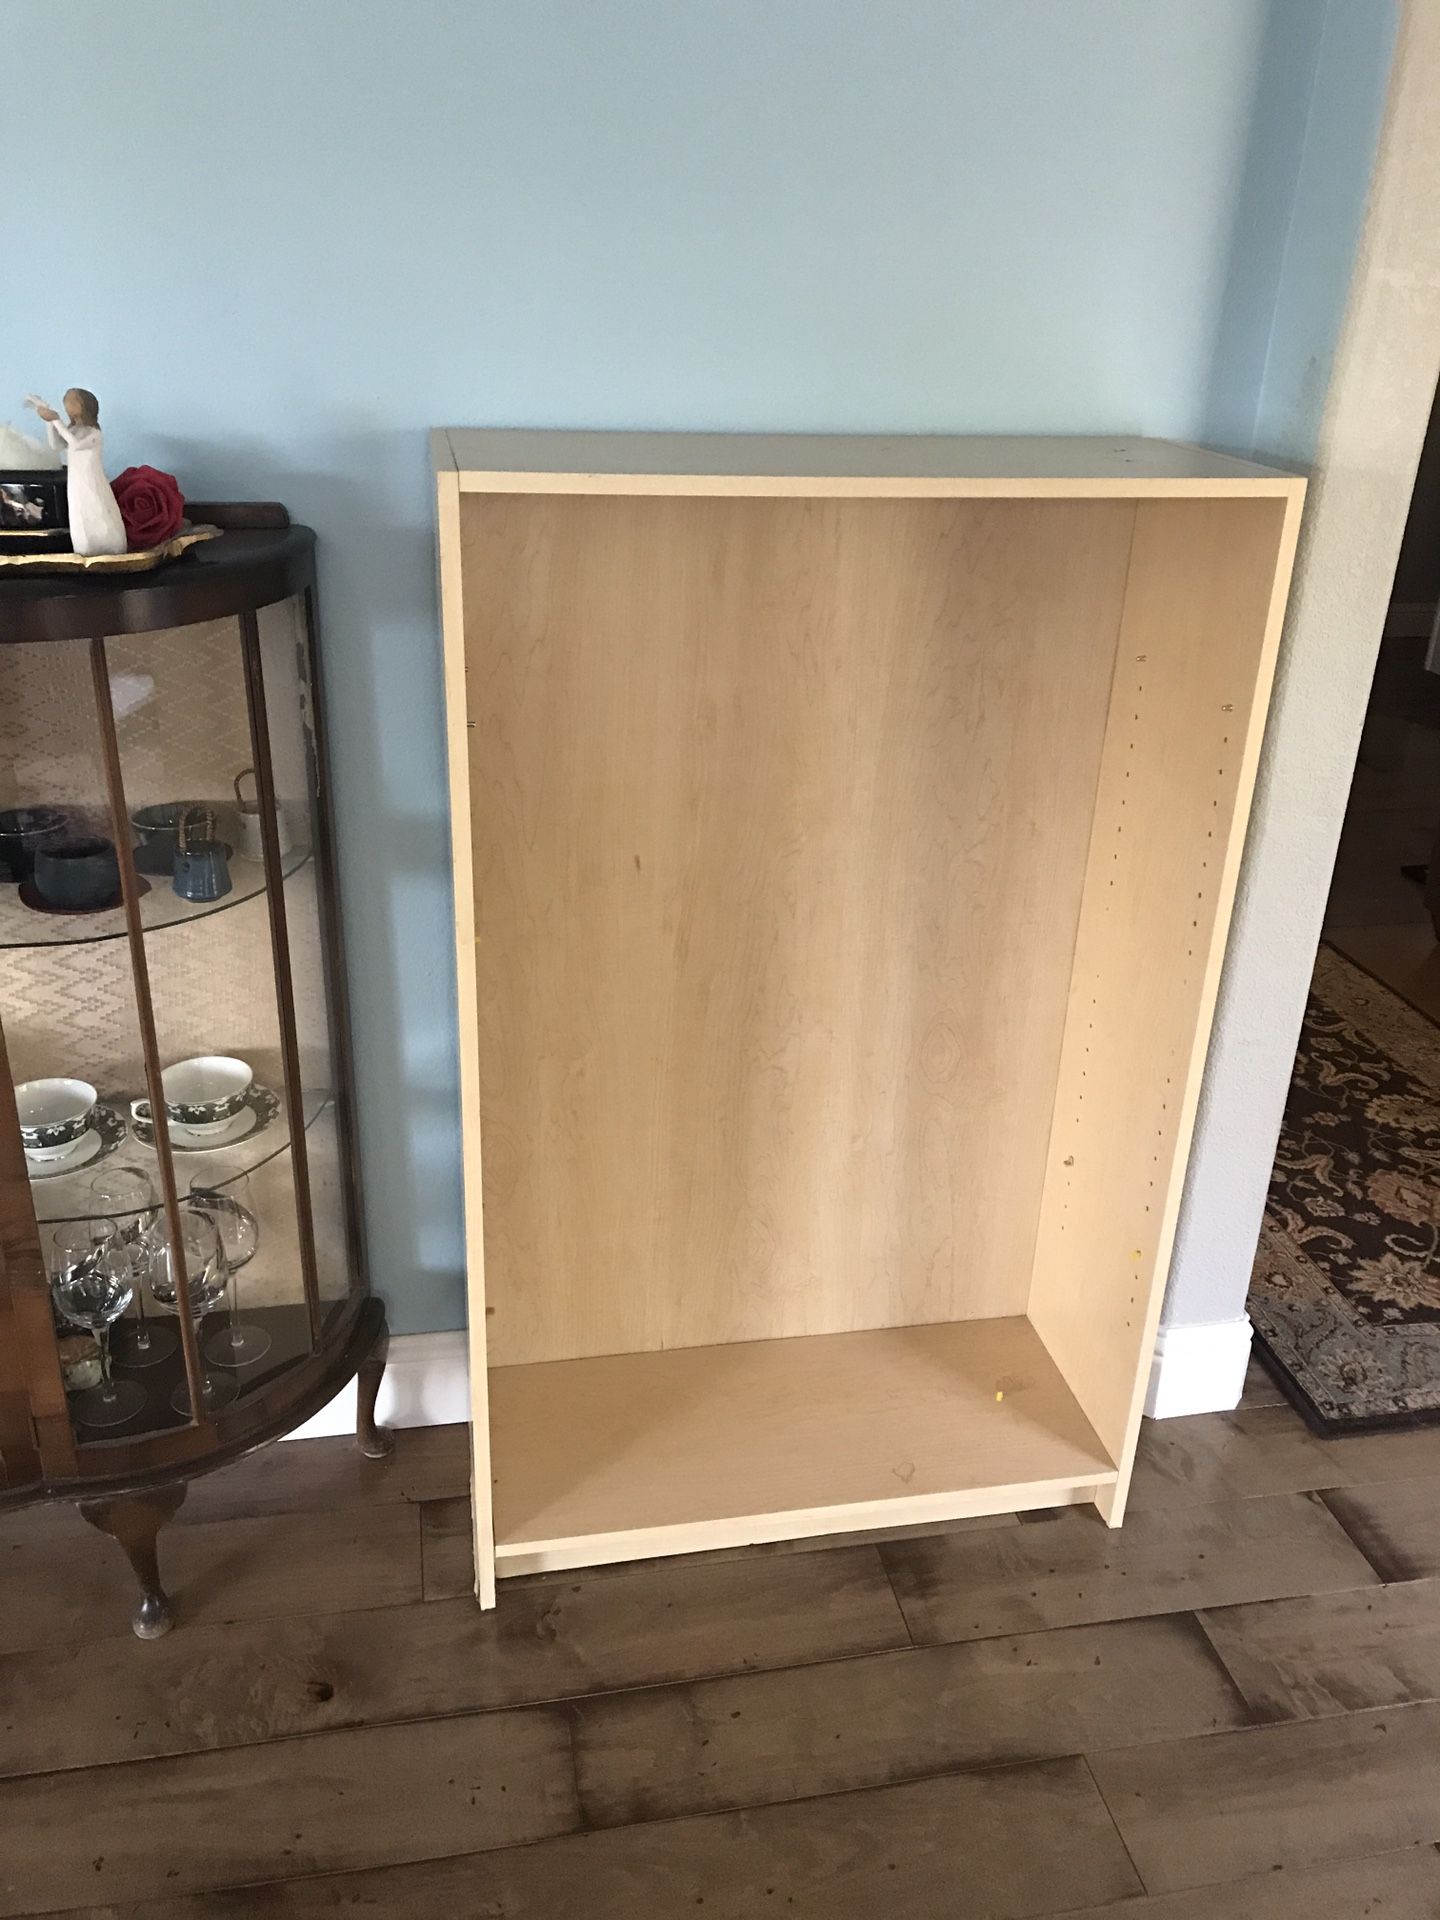 Two IKEA bookcases - both have shelves but one needs new pegs to hold shelving.